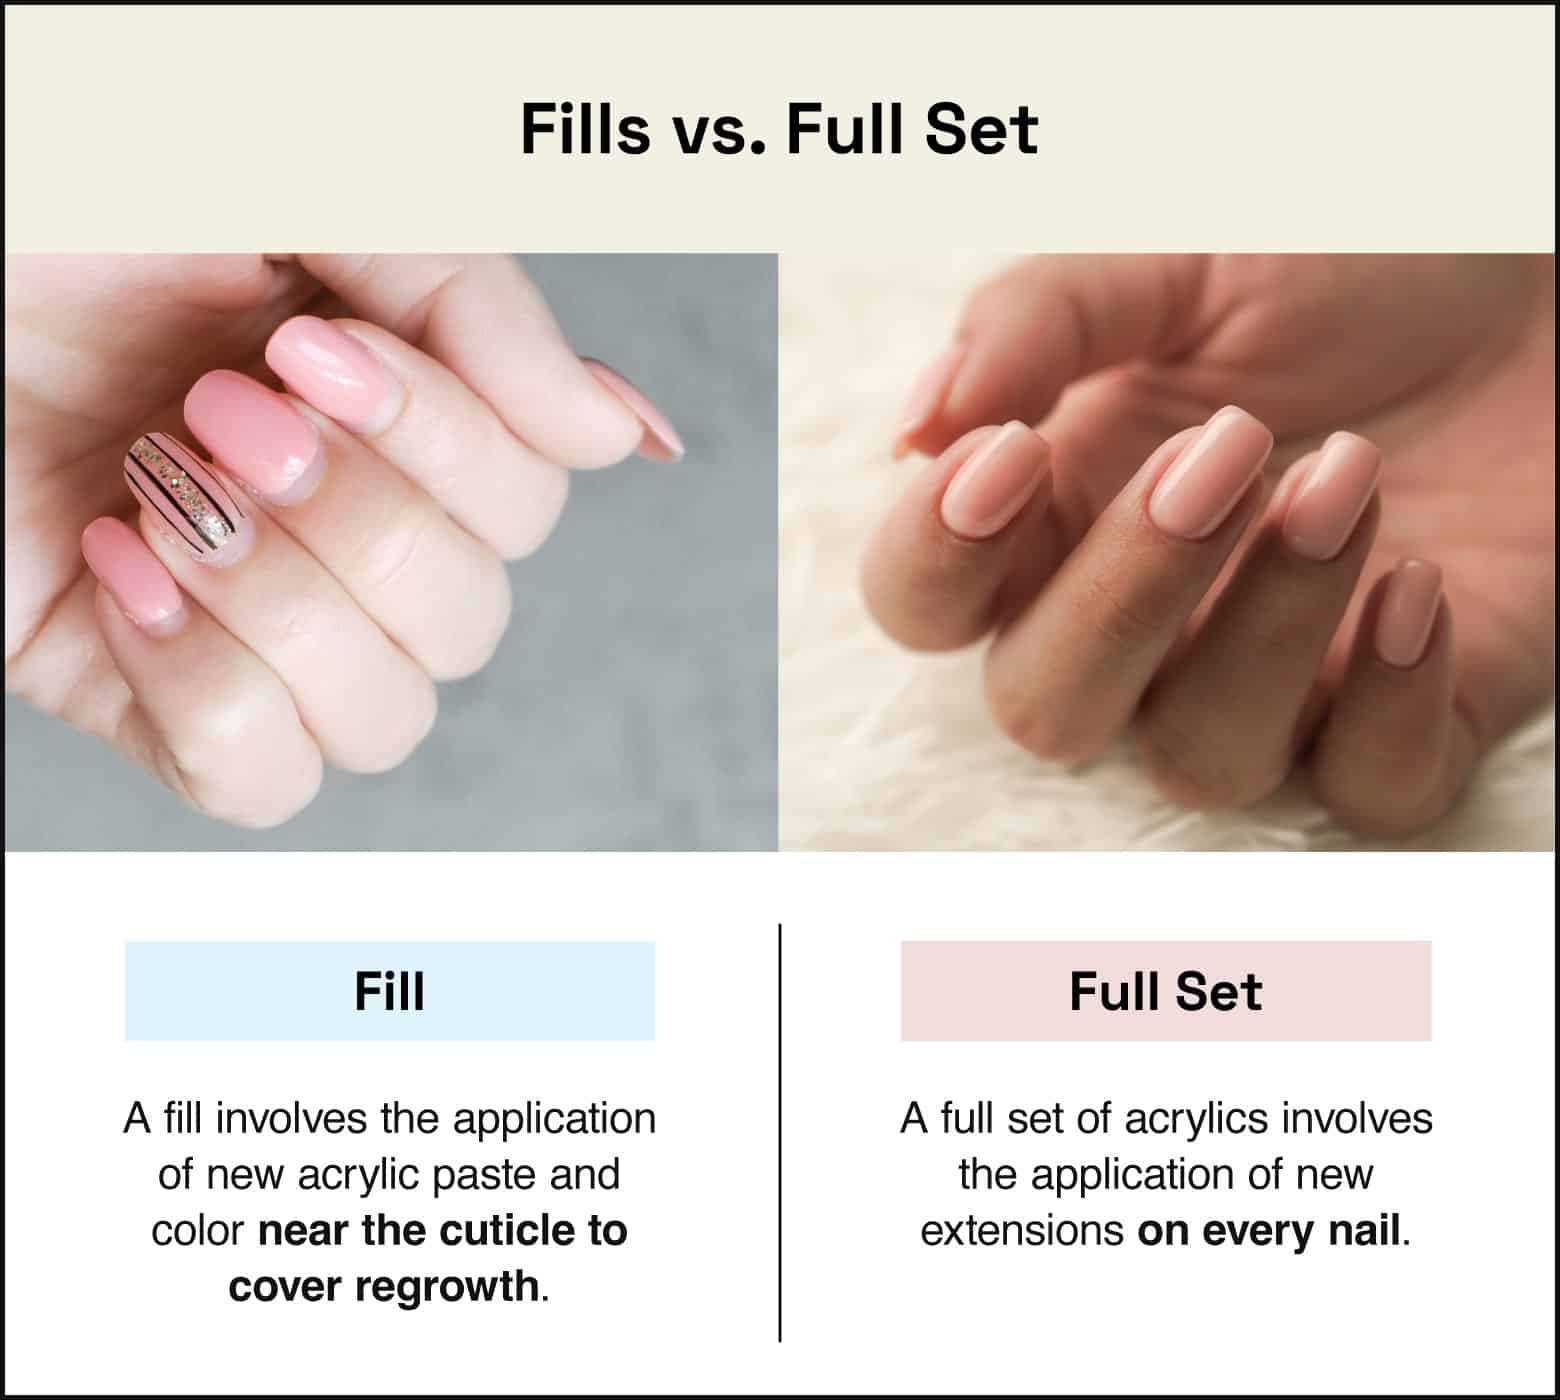 side-by-side images explaining the difference between a fill appointment covers regrowth while a full set involves applying new set of nails